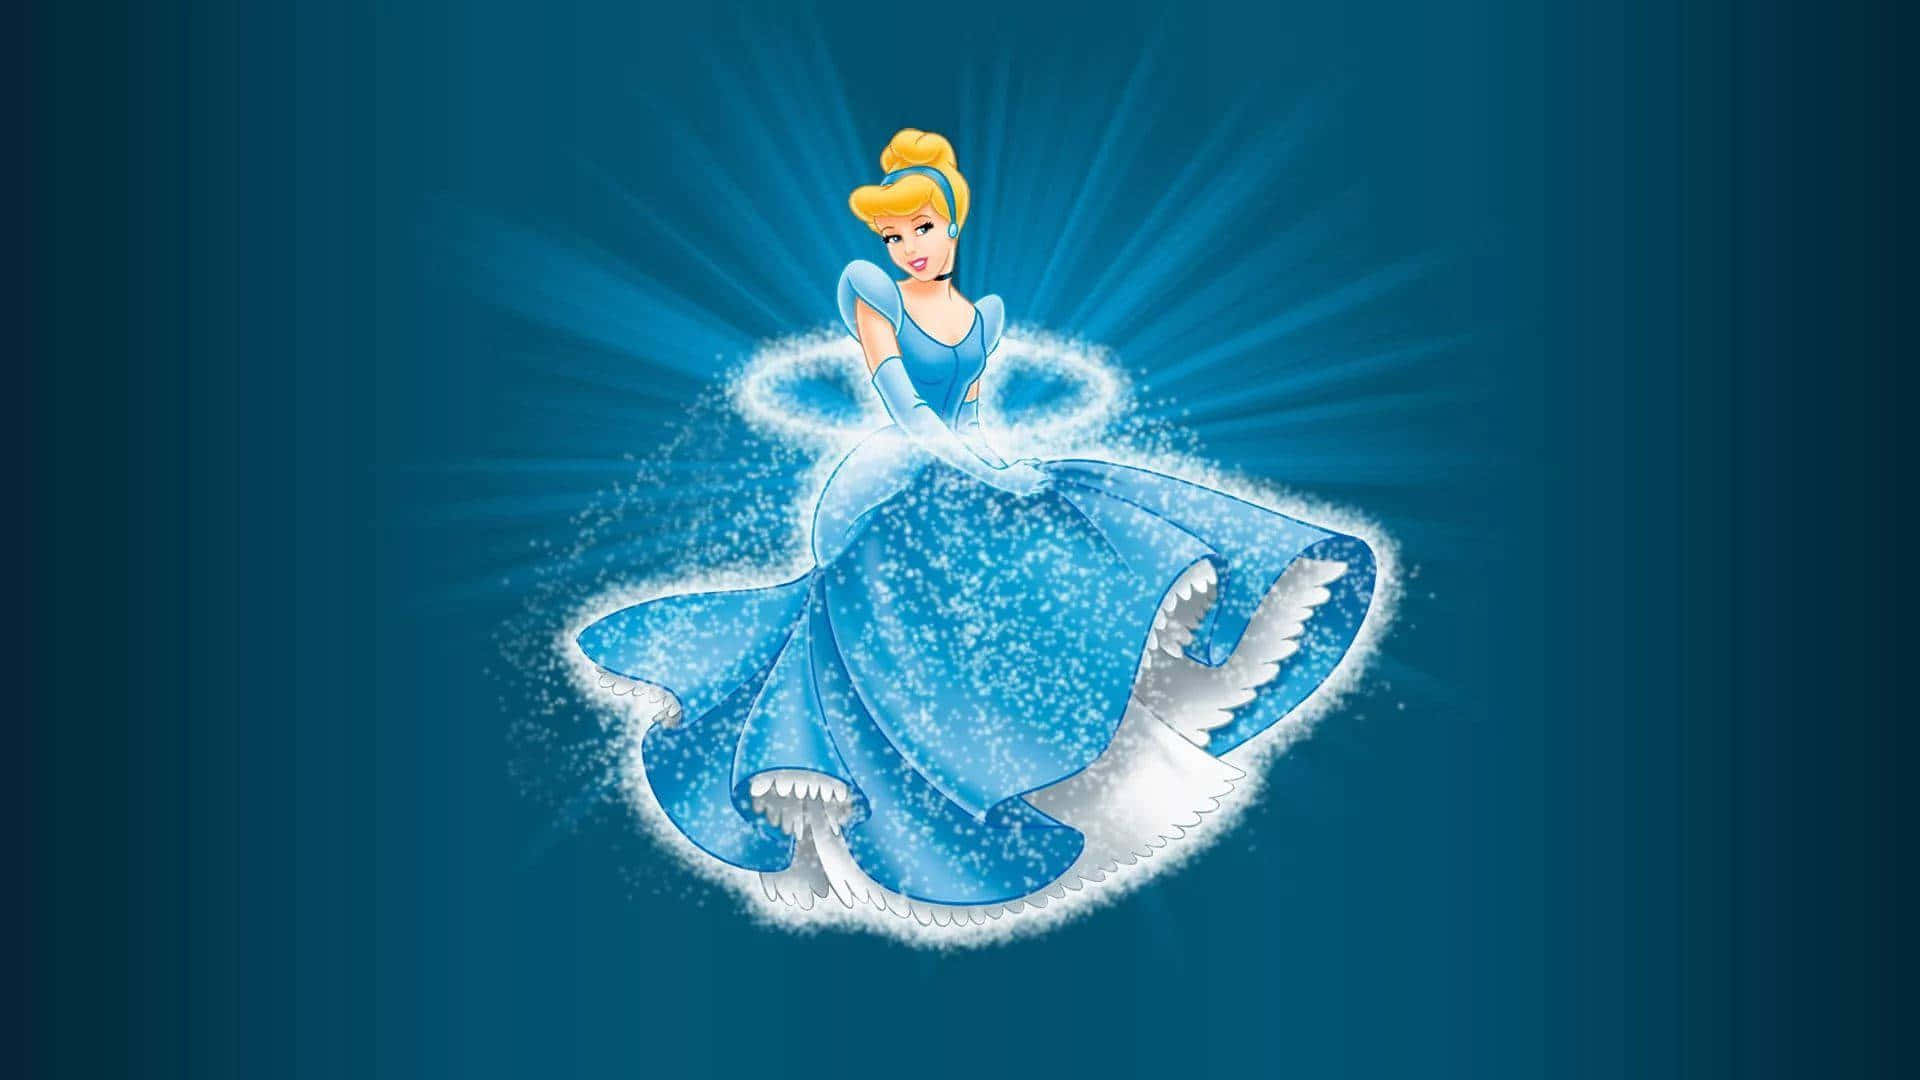 Live happily ever after with Cinderella!